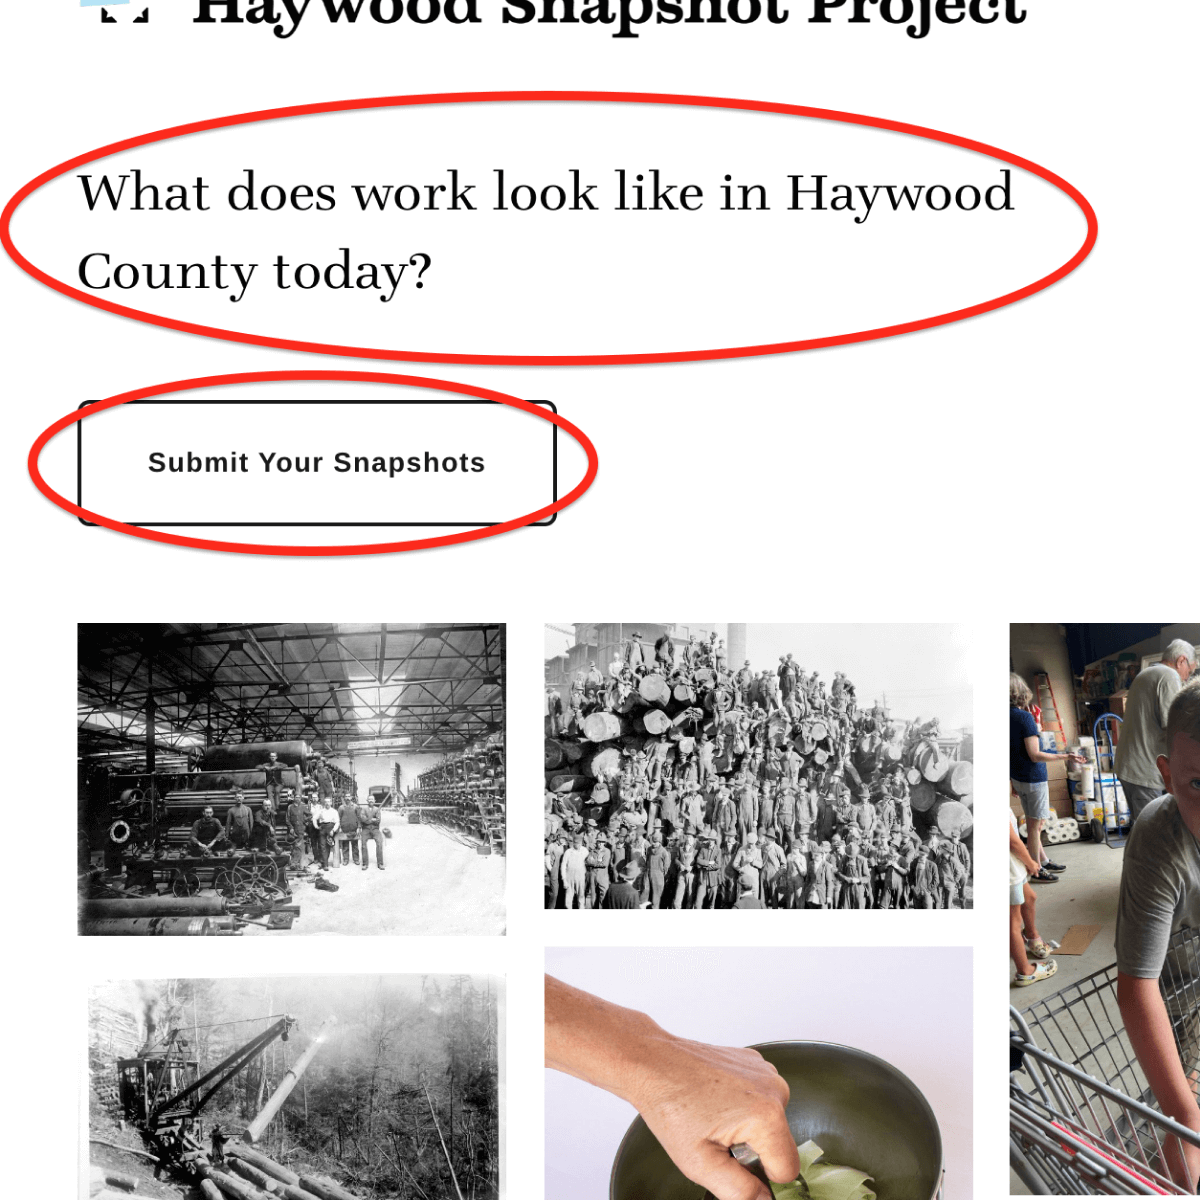 Screenshot of one of the website’s detail pages showing a content-specific prompt that reads ‘What does work look like in Haywood County today?’ next to the ‘Submit Your Snapshots’ button